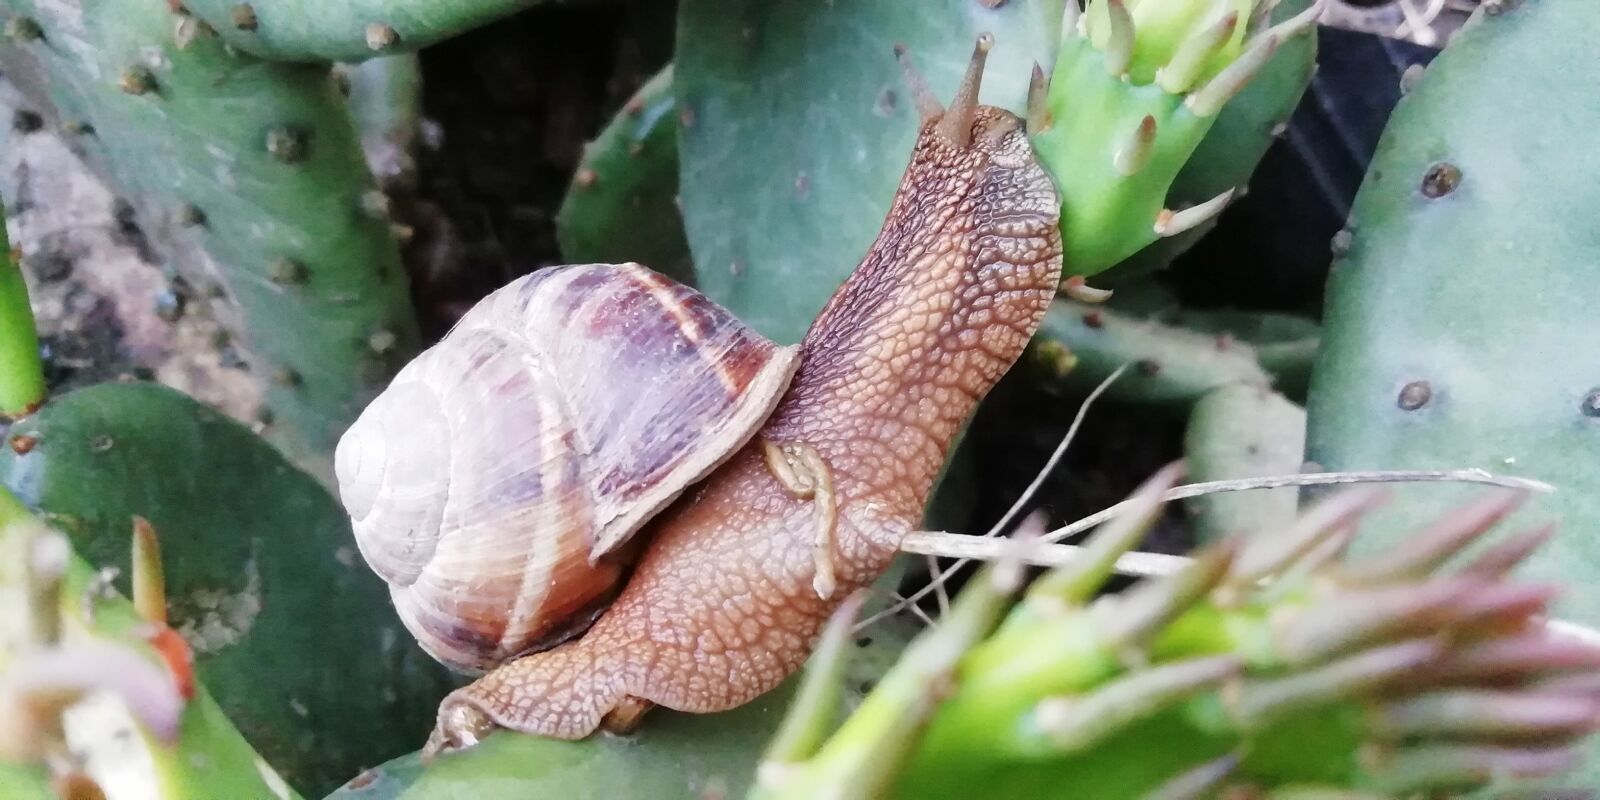 HUAWEI Honor 9 Lite sample photo. Snail, cactus, cottage photography